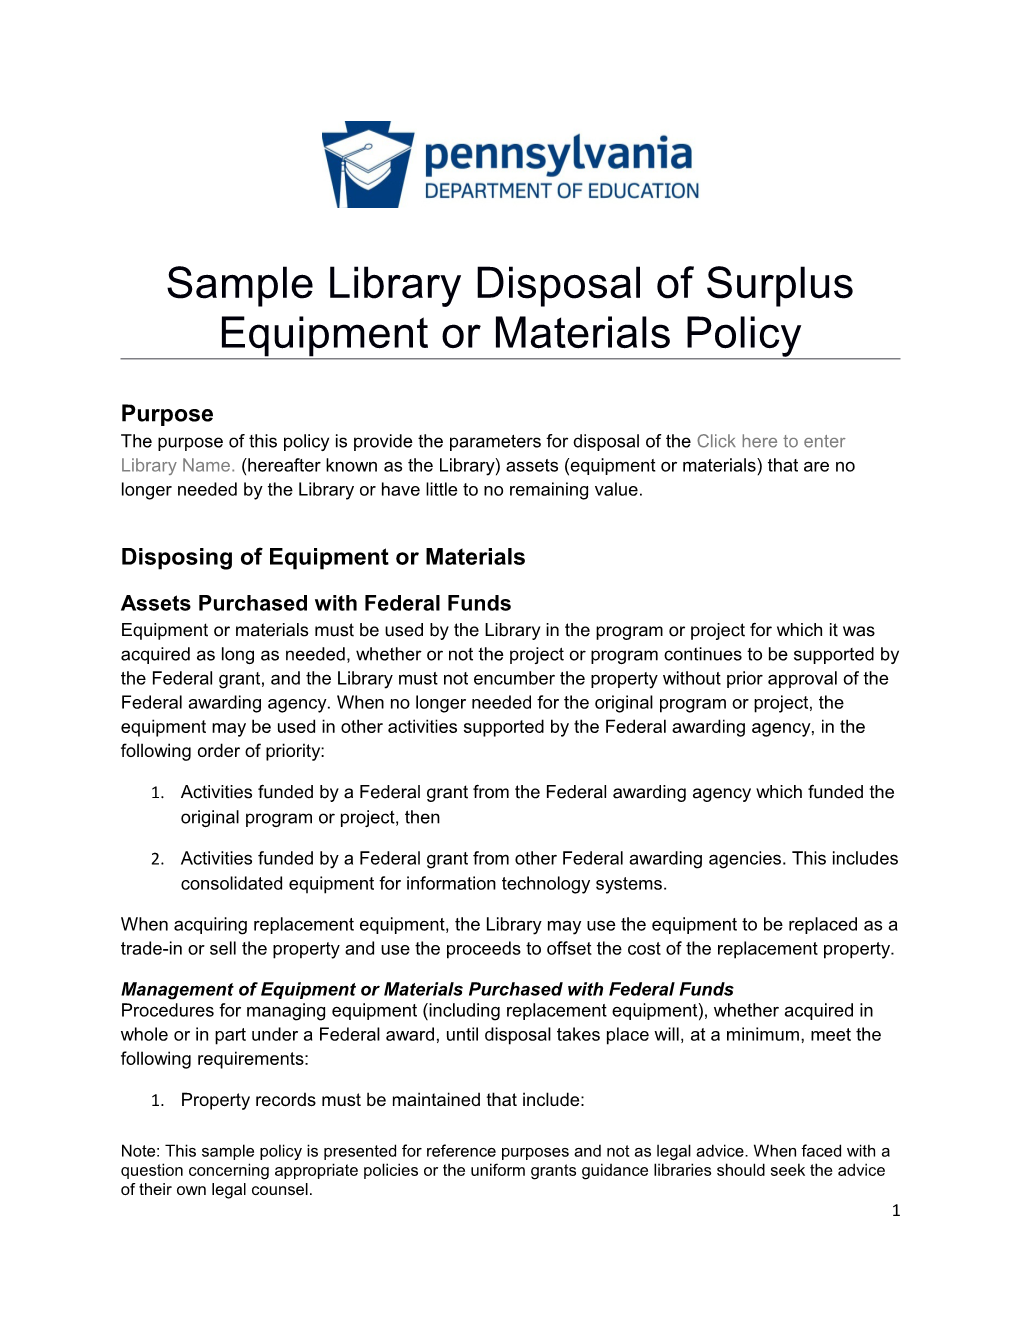 Sample Library Disposal of Surplus Equipment Or Materials Policy